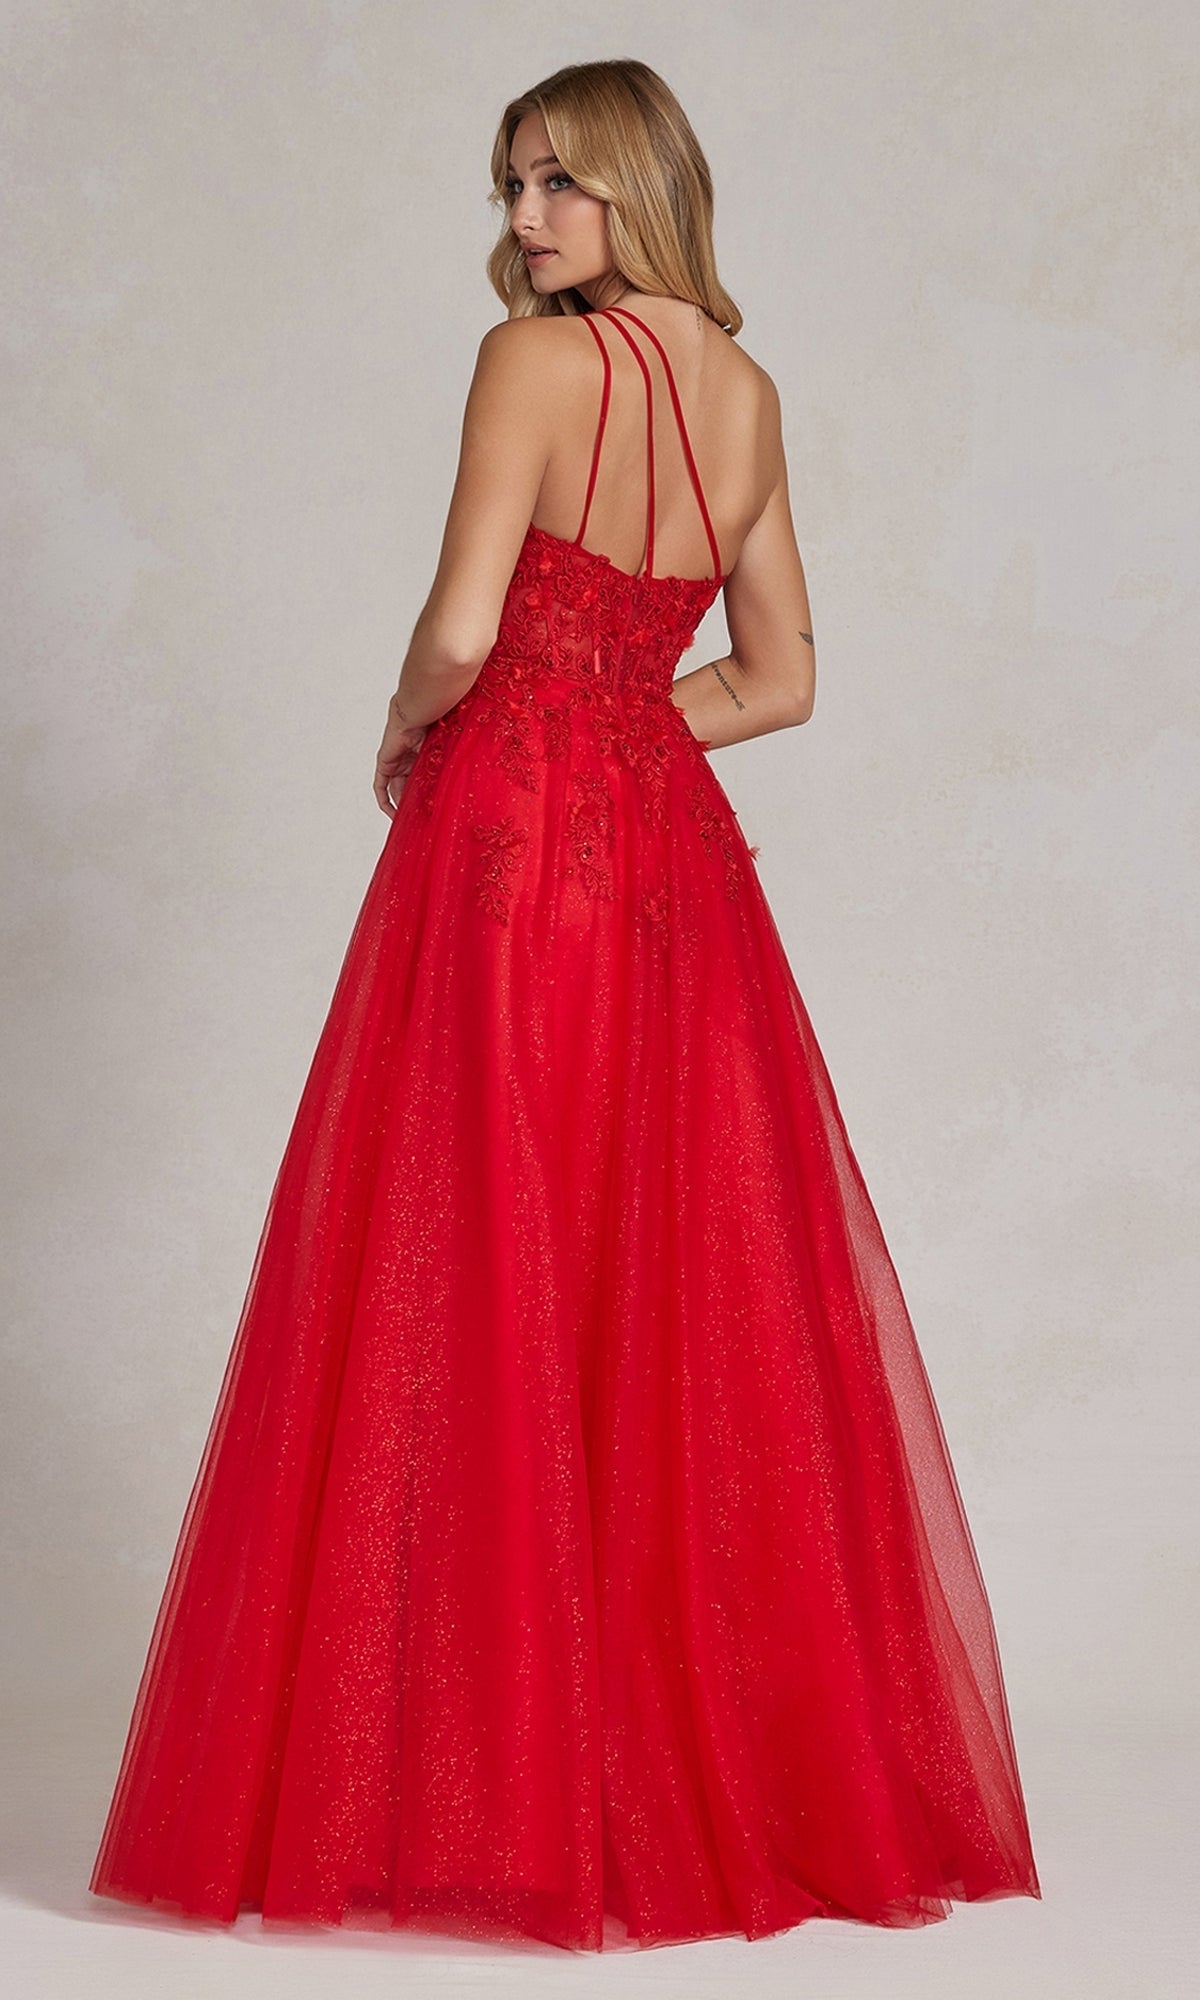  One-Shoulder Long Red Prom Ball Gown